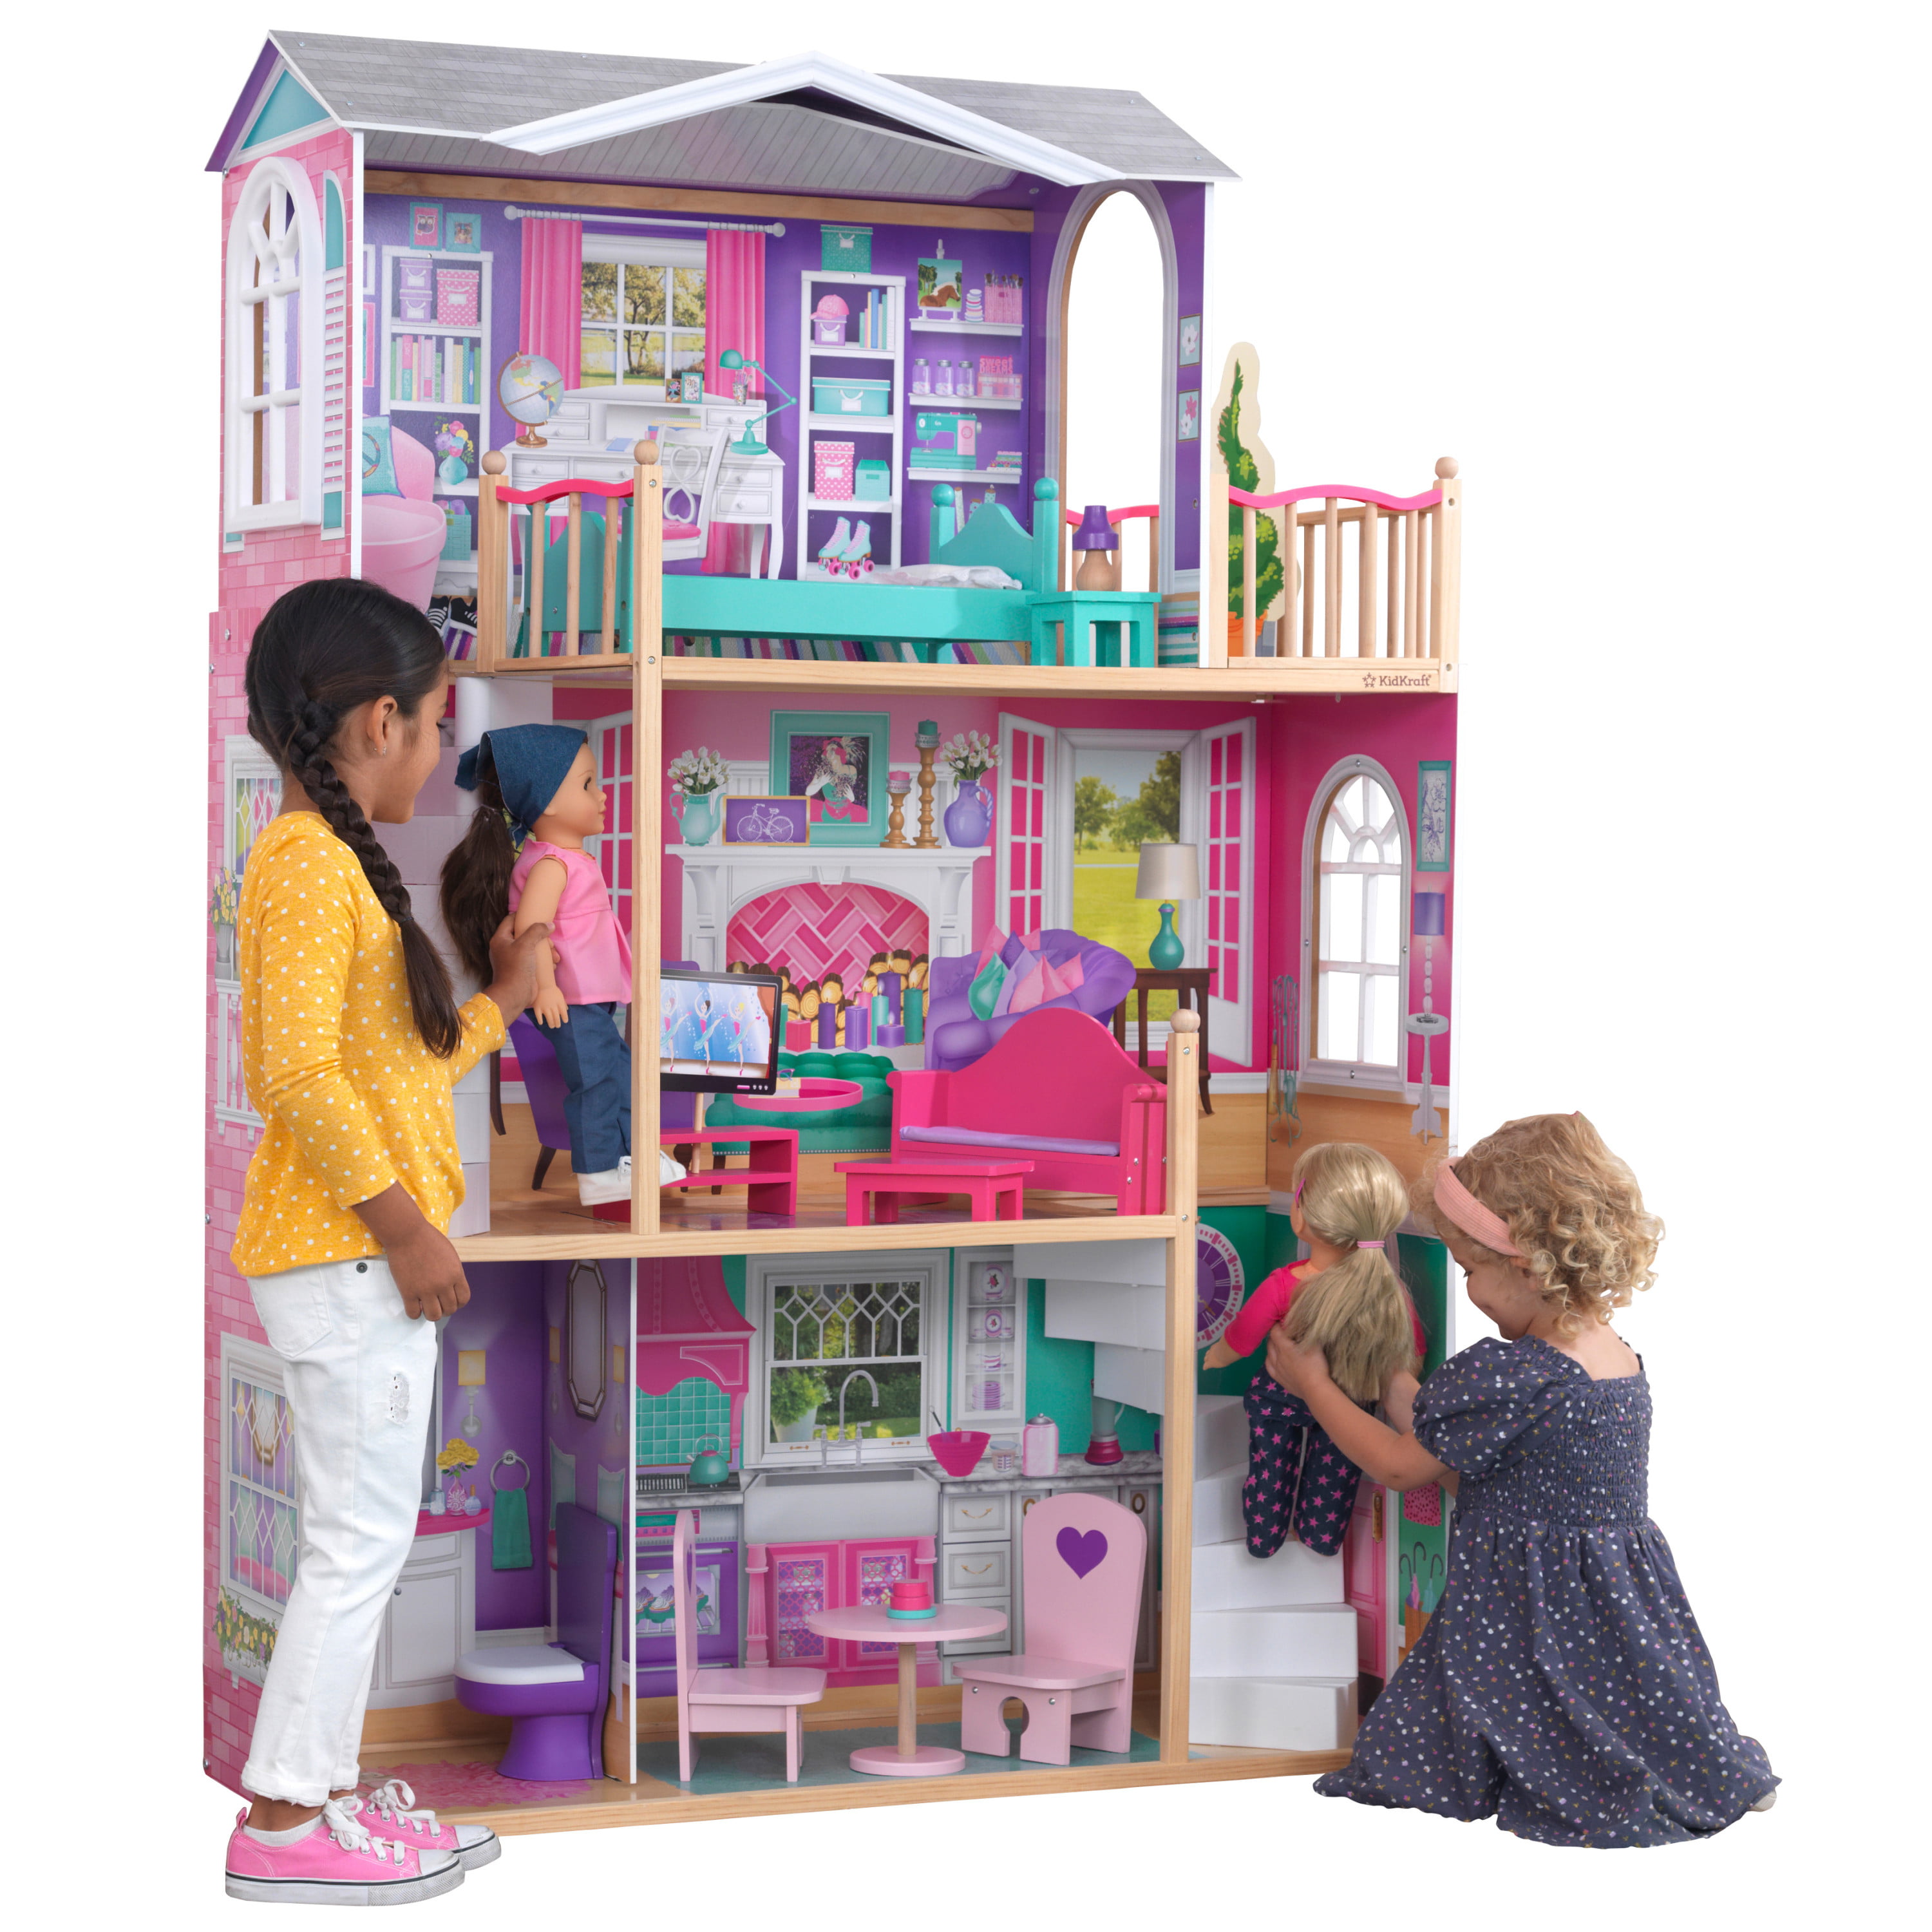 Kidkraft 18in Wooden Dollhouse Doll Manor 5ft Tall 12 Pieces Furniture Girls Playhouse !! 